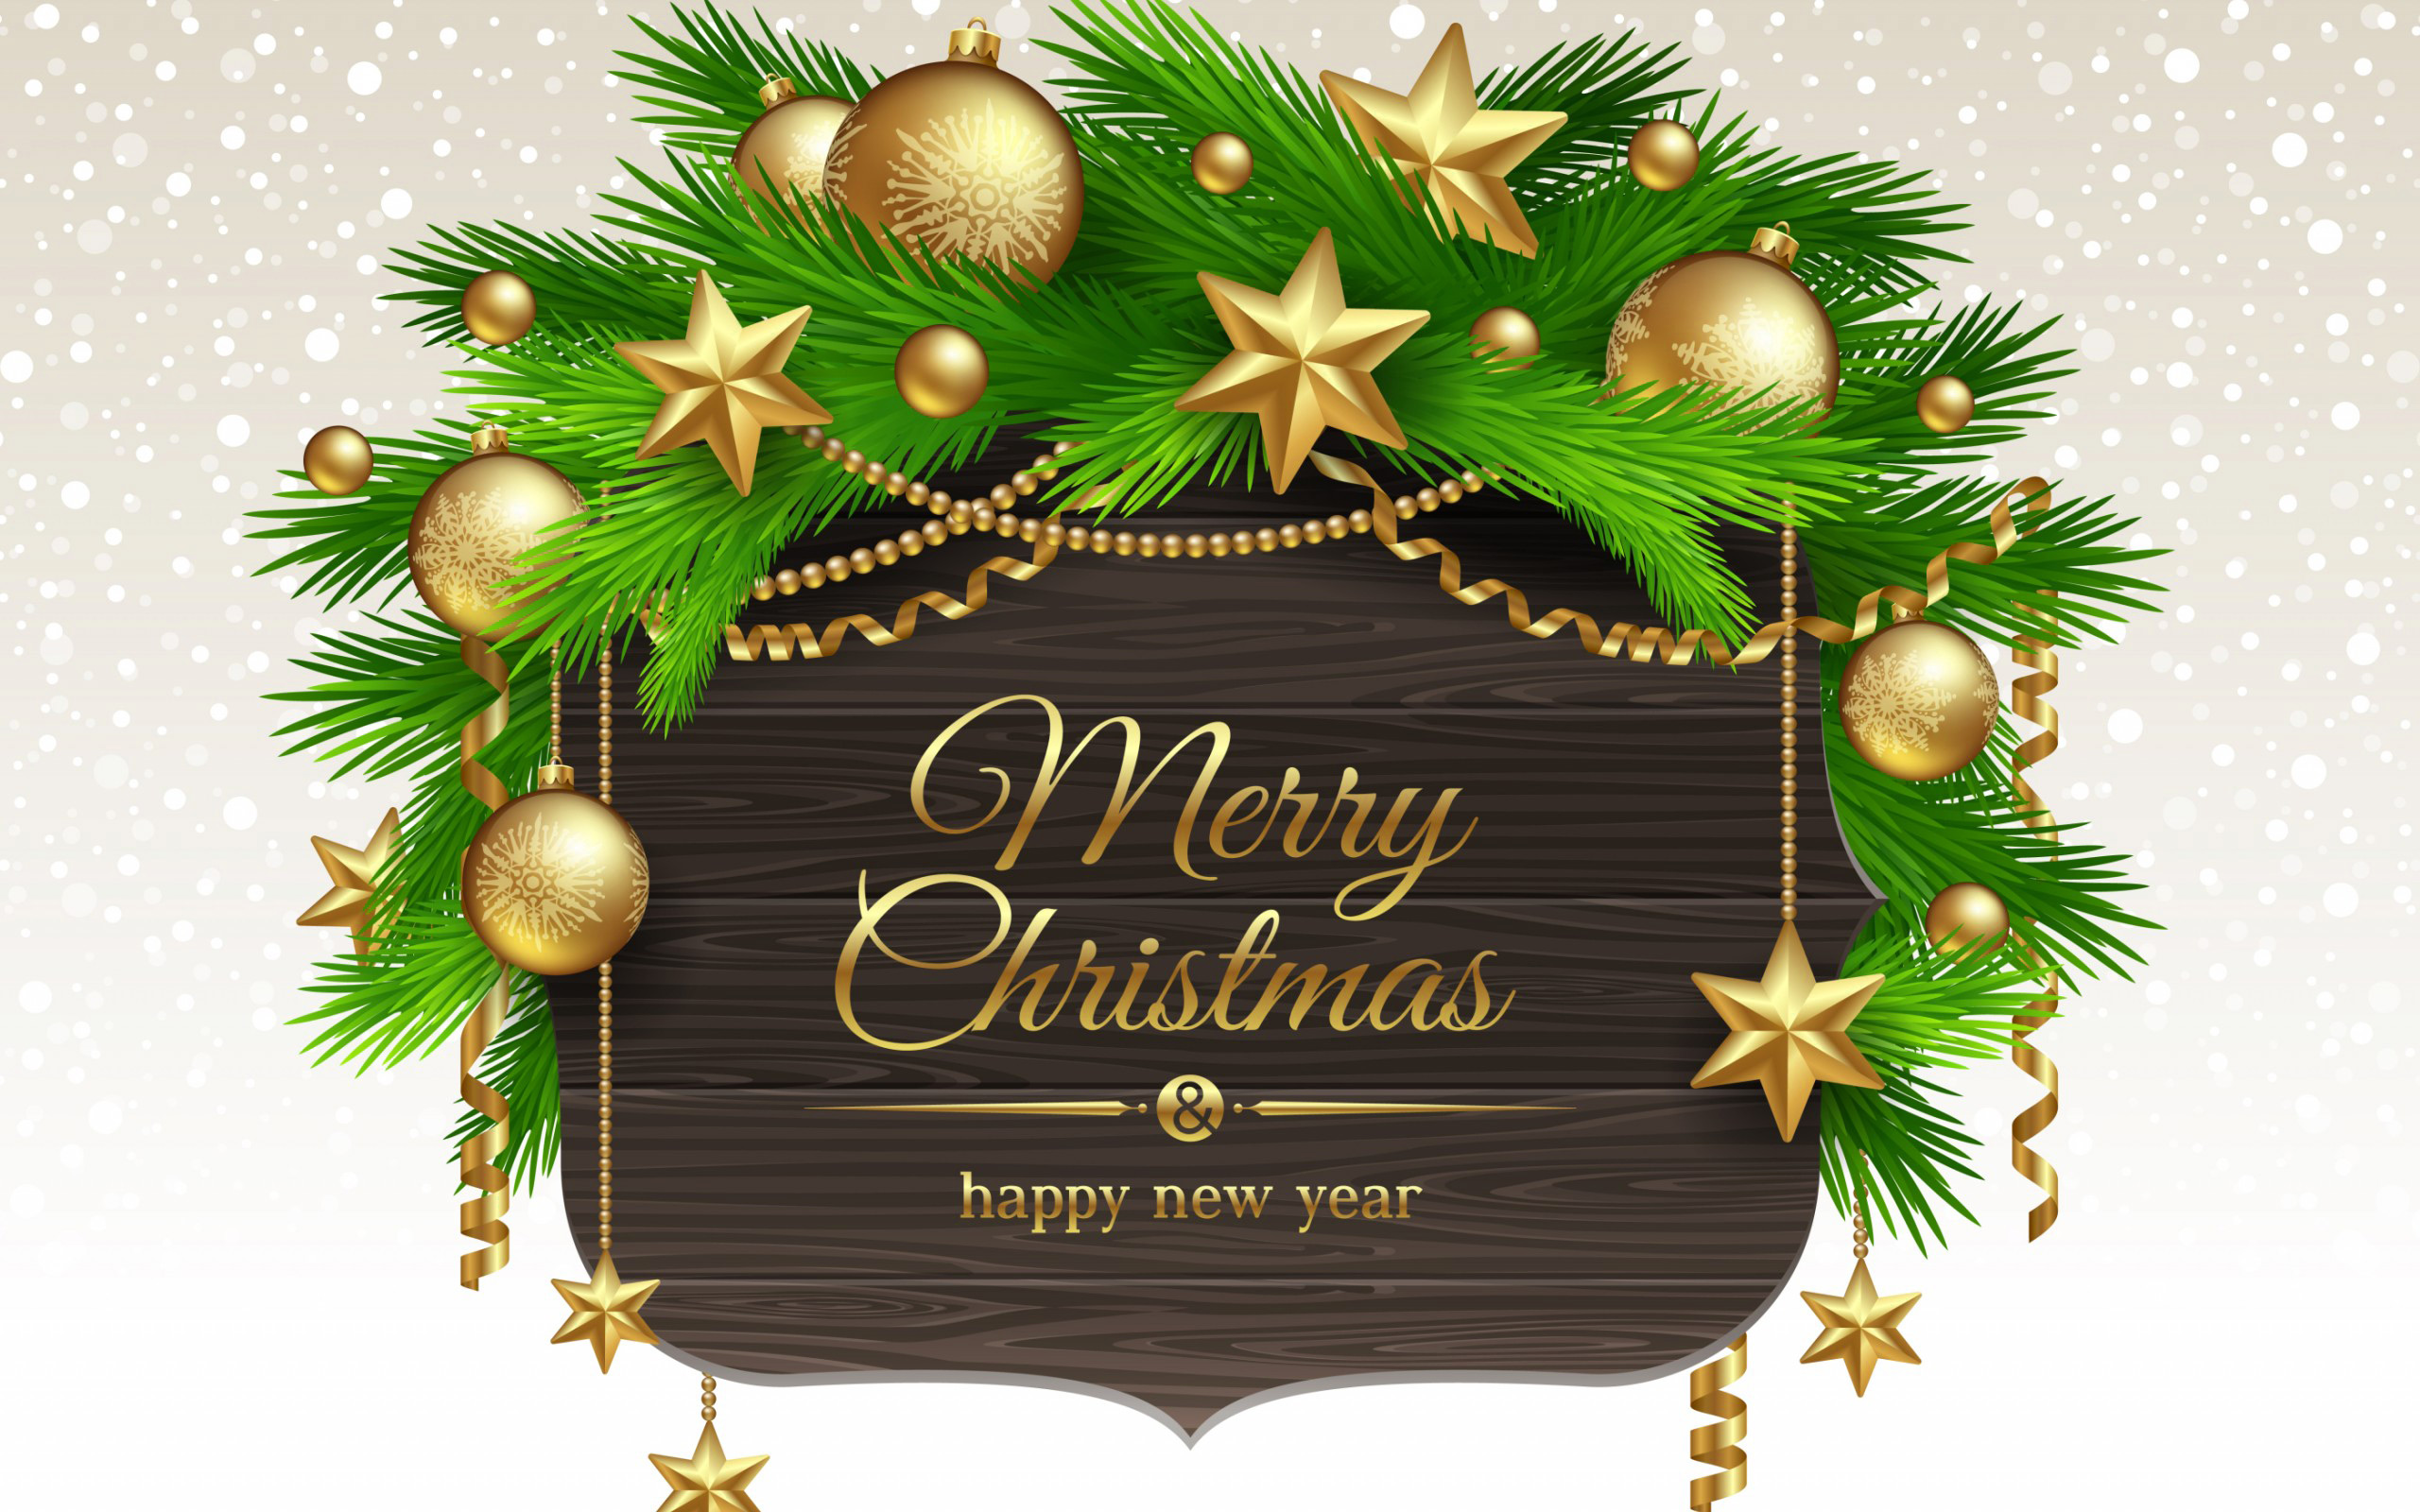 Merry Christmas Happy New Year Background | Gallery Yopriceville - High-Quality Images and ...